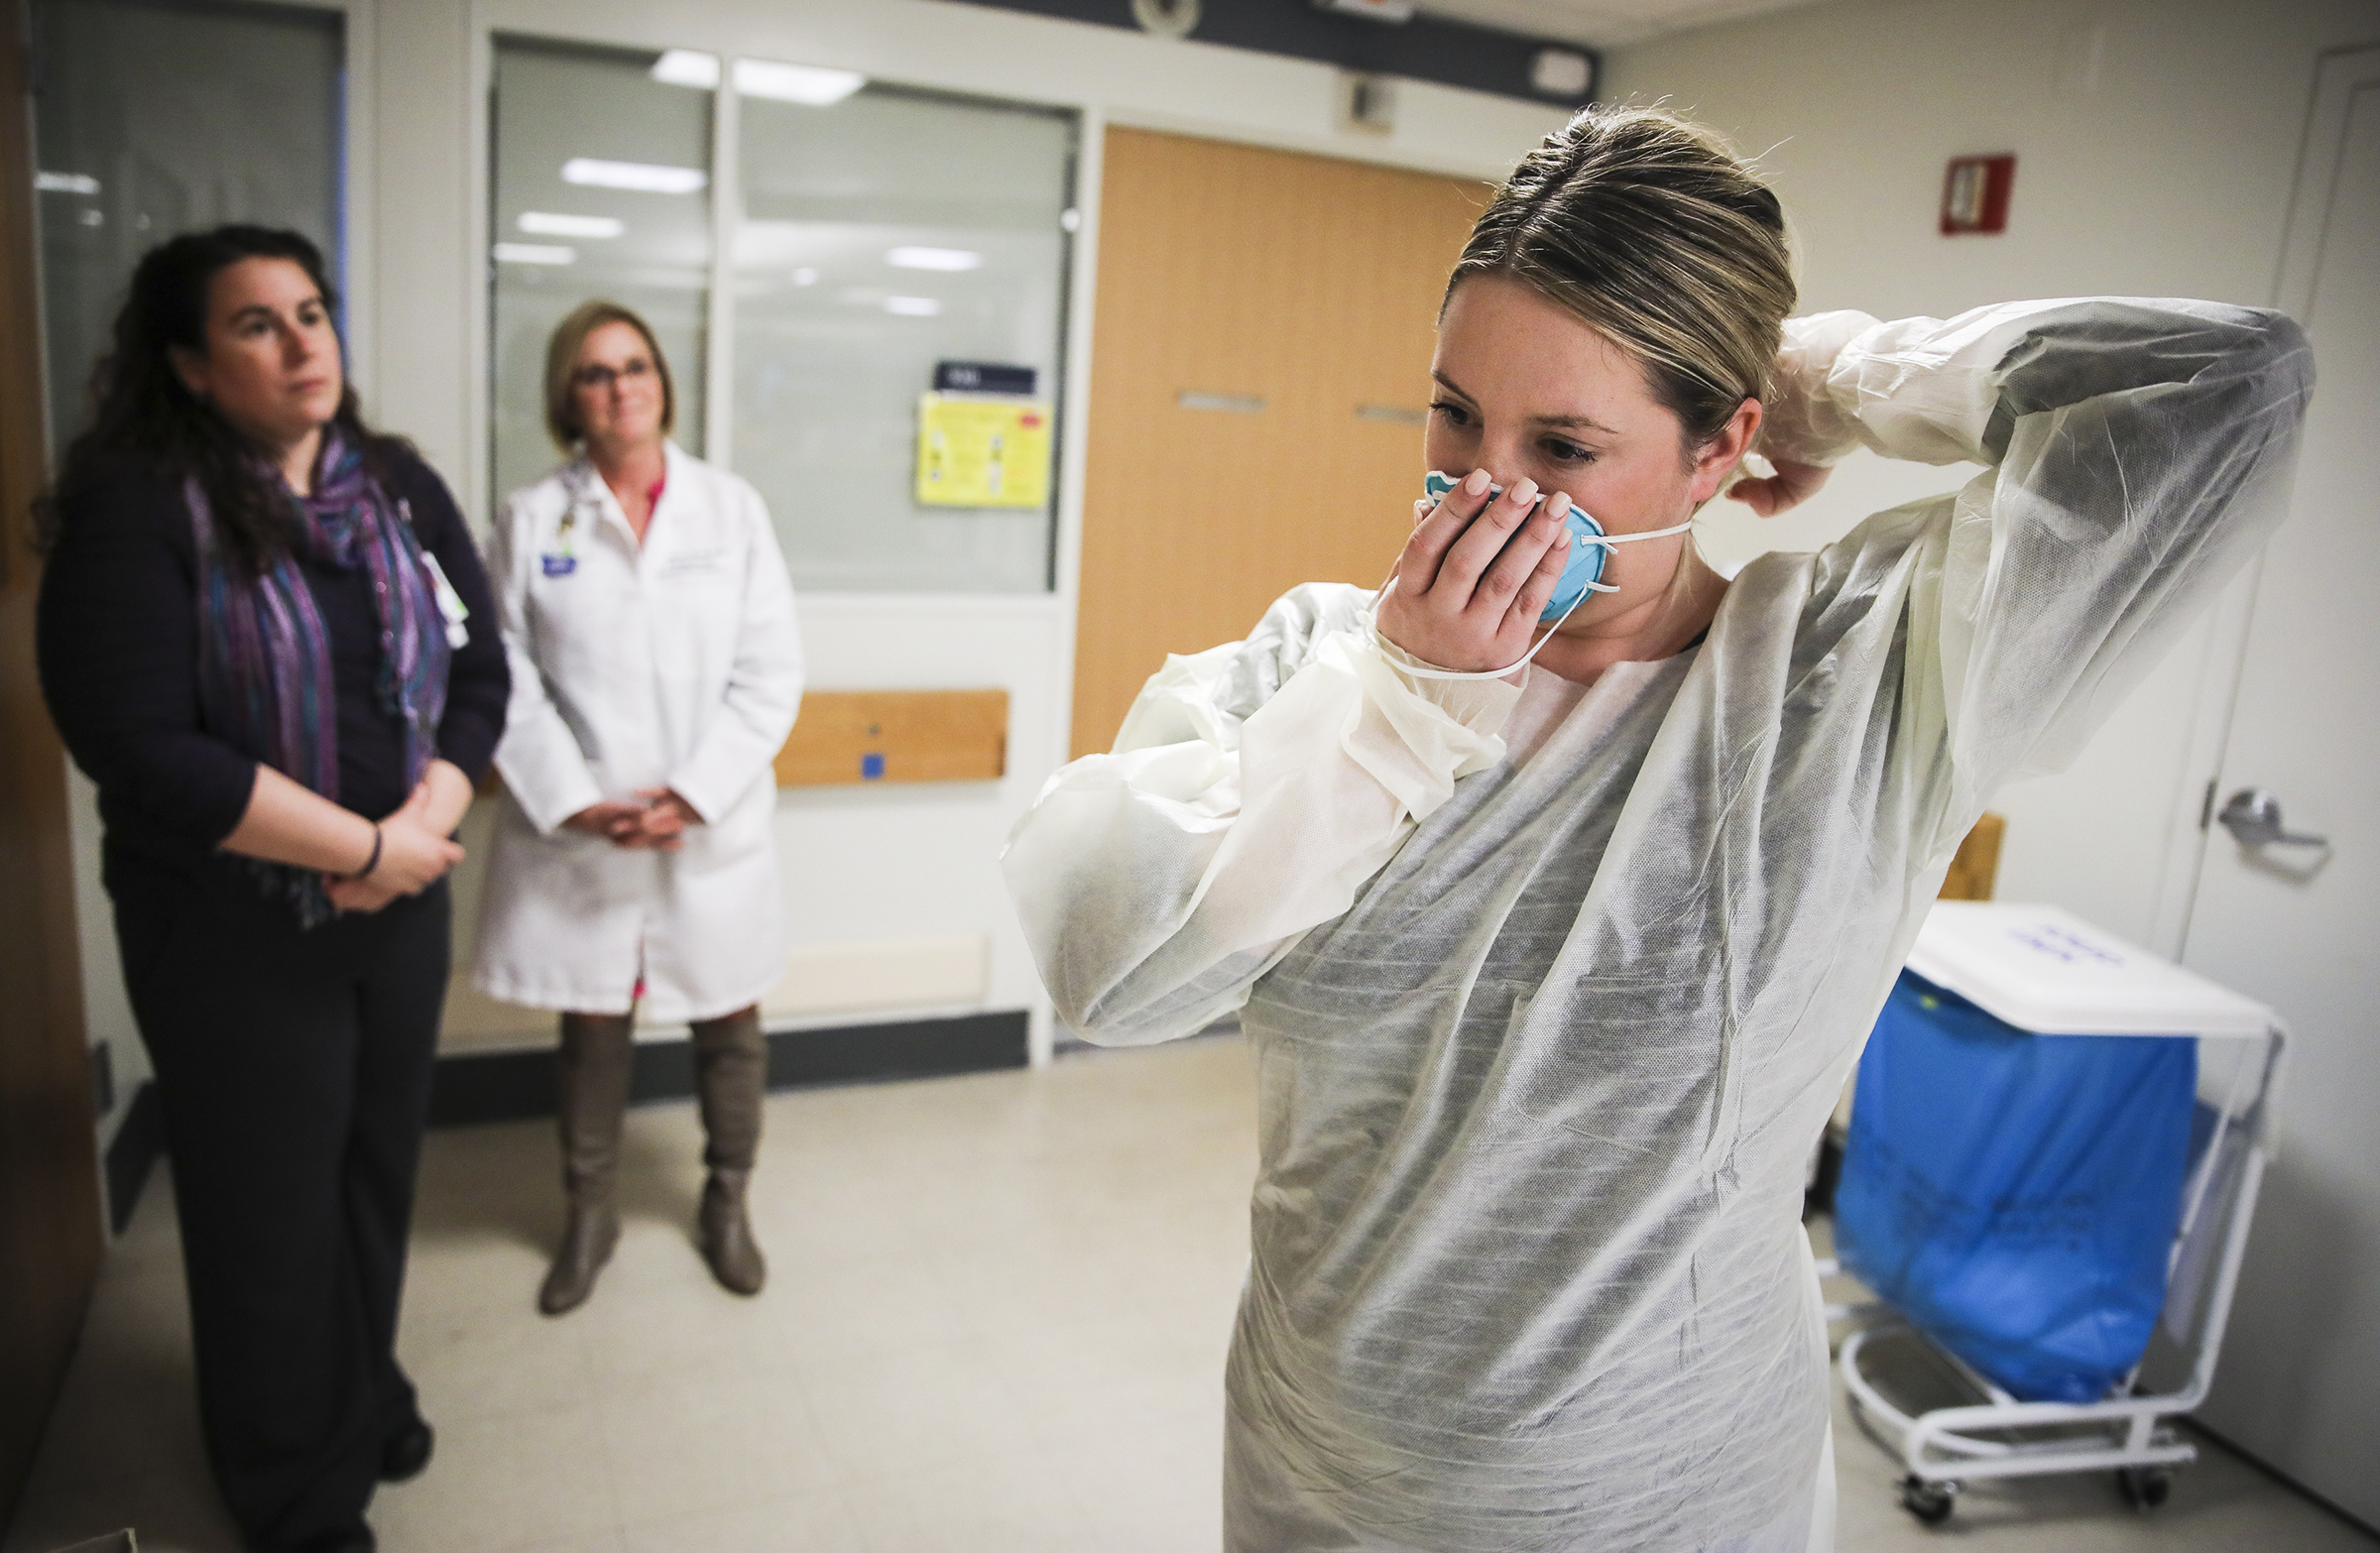 Kaylen Smith demonstrates how to don the protective gear that must be worn when dealing with patients with an infectious disease as Massachusetts General Hospital in Boston prepares for a possible surge in coronavirus patients, on Feb. 27, 2020. (Erin Clark—The Boston Globe via Getty Images)